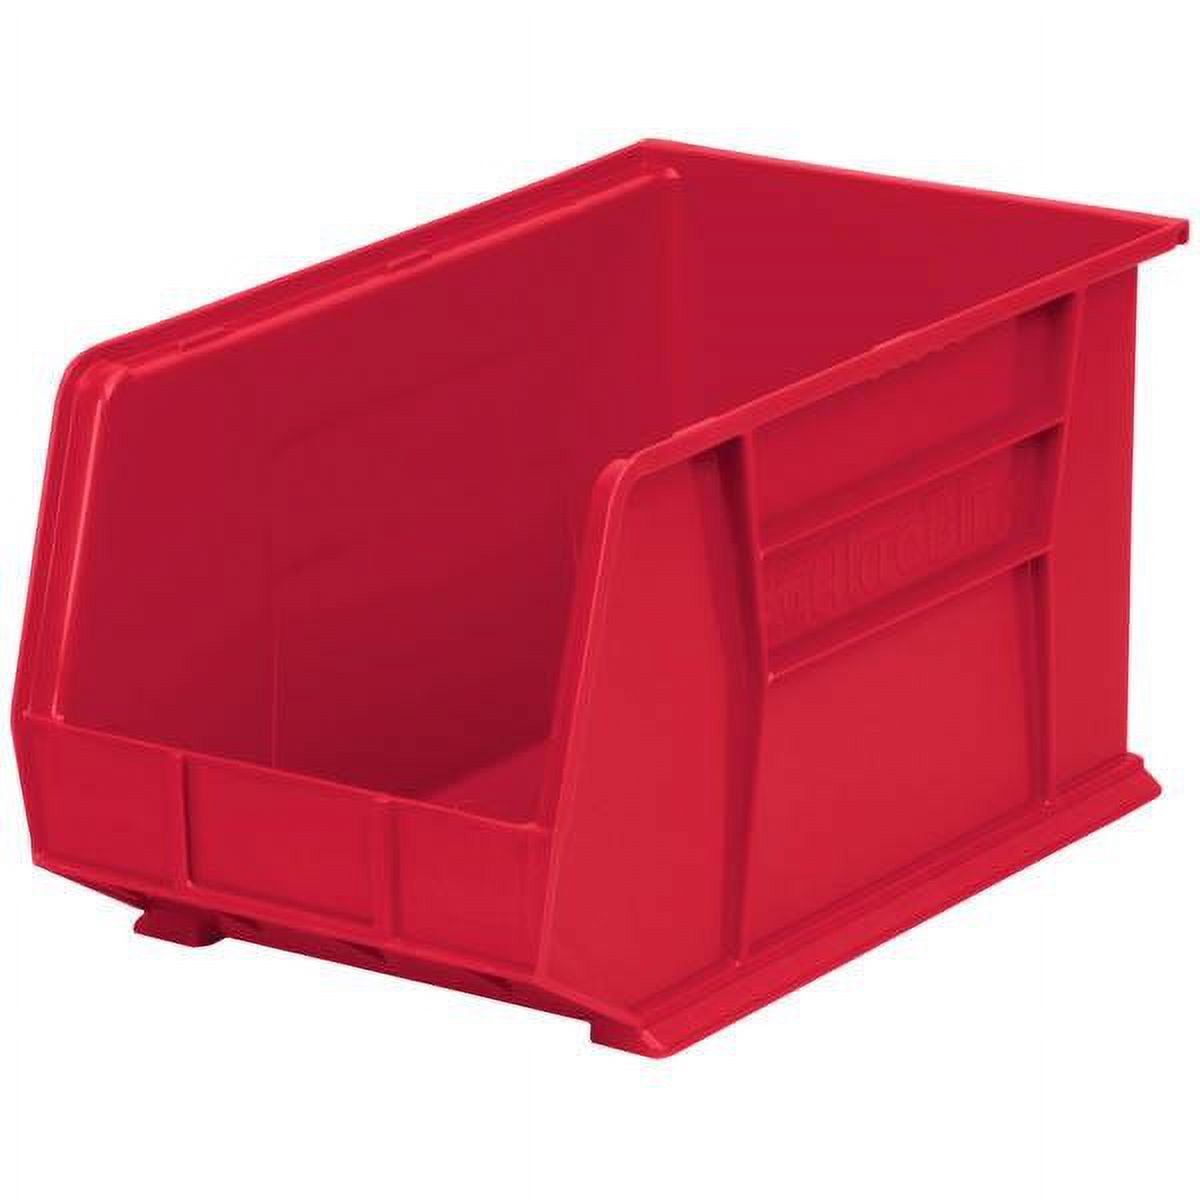 Akro-Mils Stackable Storage Bins, AkroBins 30260 Stacking Organizer, 18"x11"x10", Red, 6-Pack - image 1 of 9